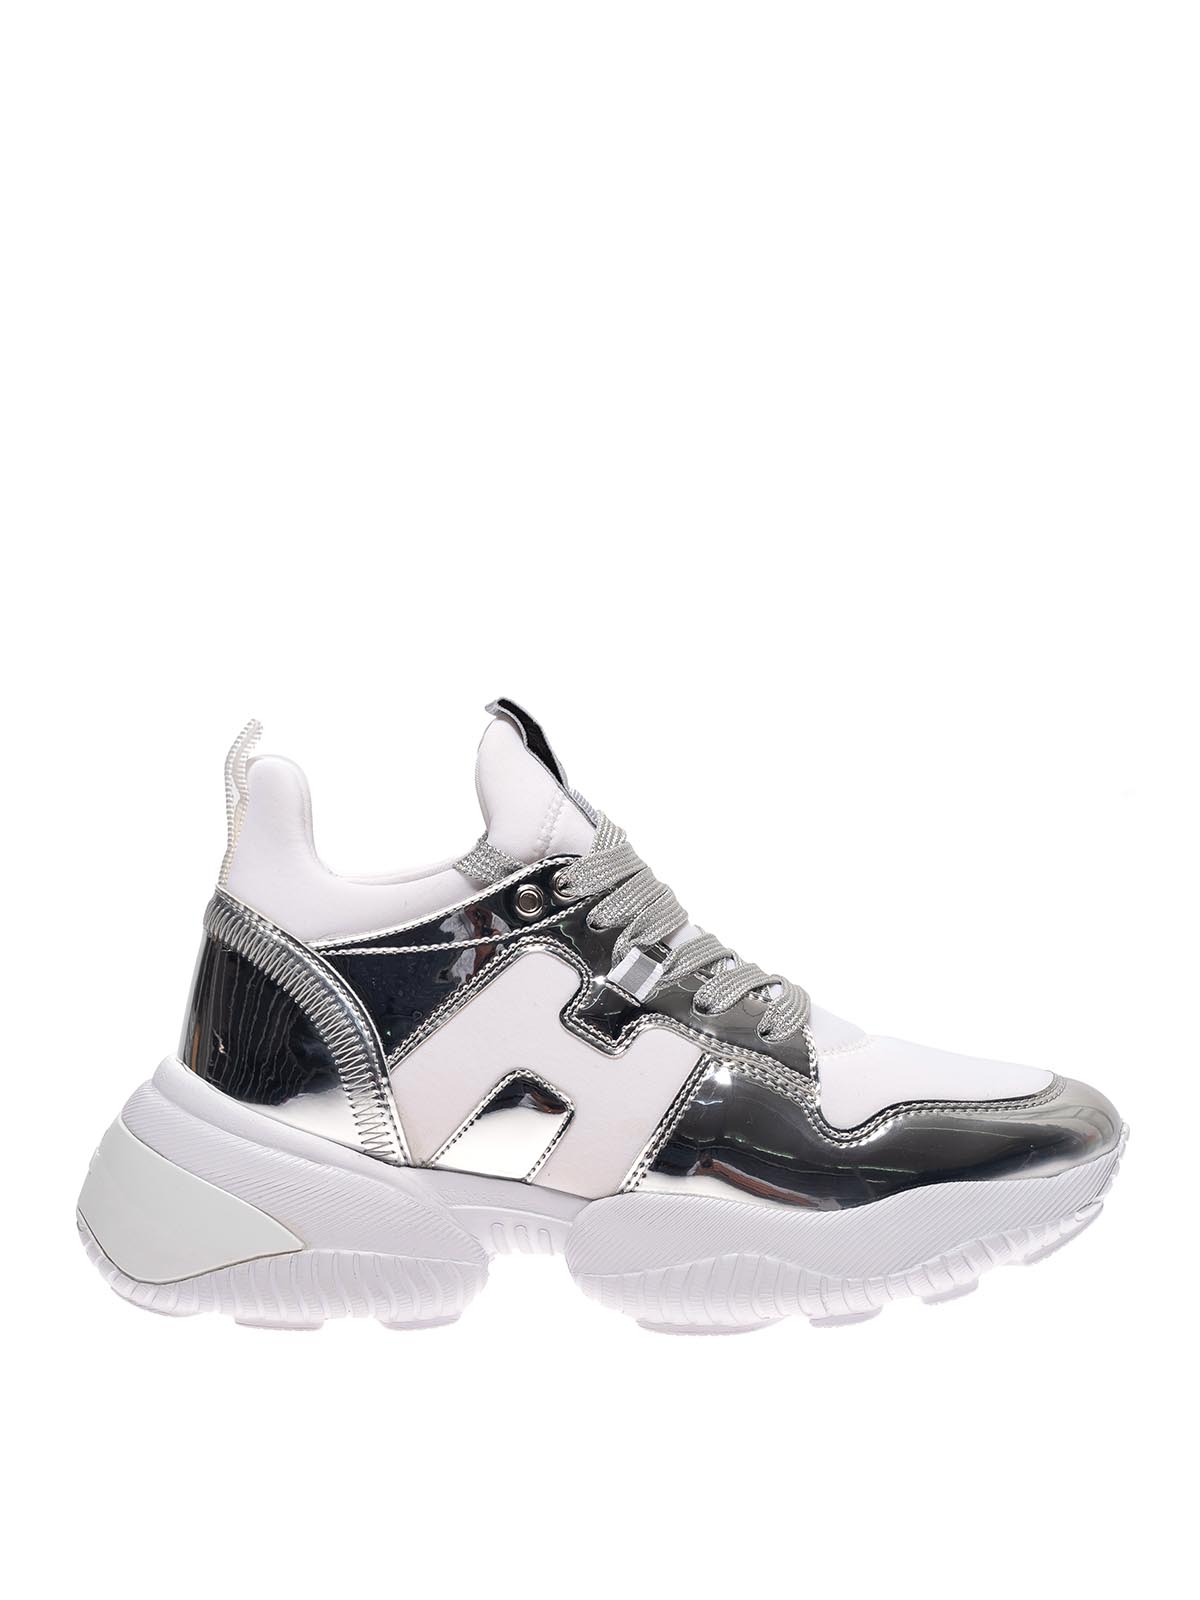 Hogan - Interaction sneakers - trainers - GYW4870CH20MSX0351 | iKRIX.com